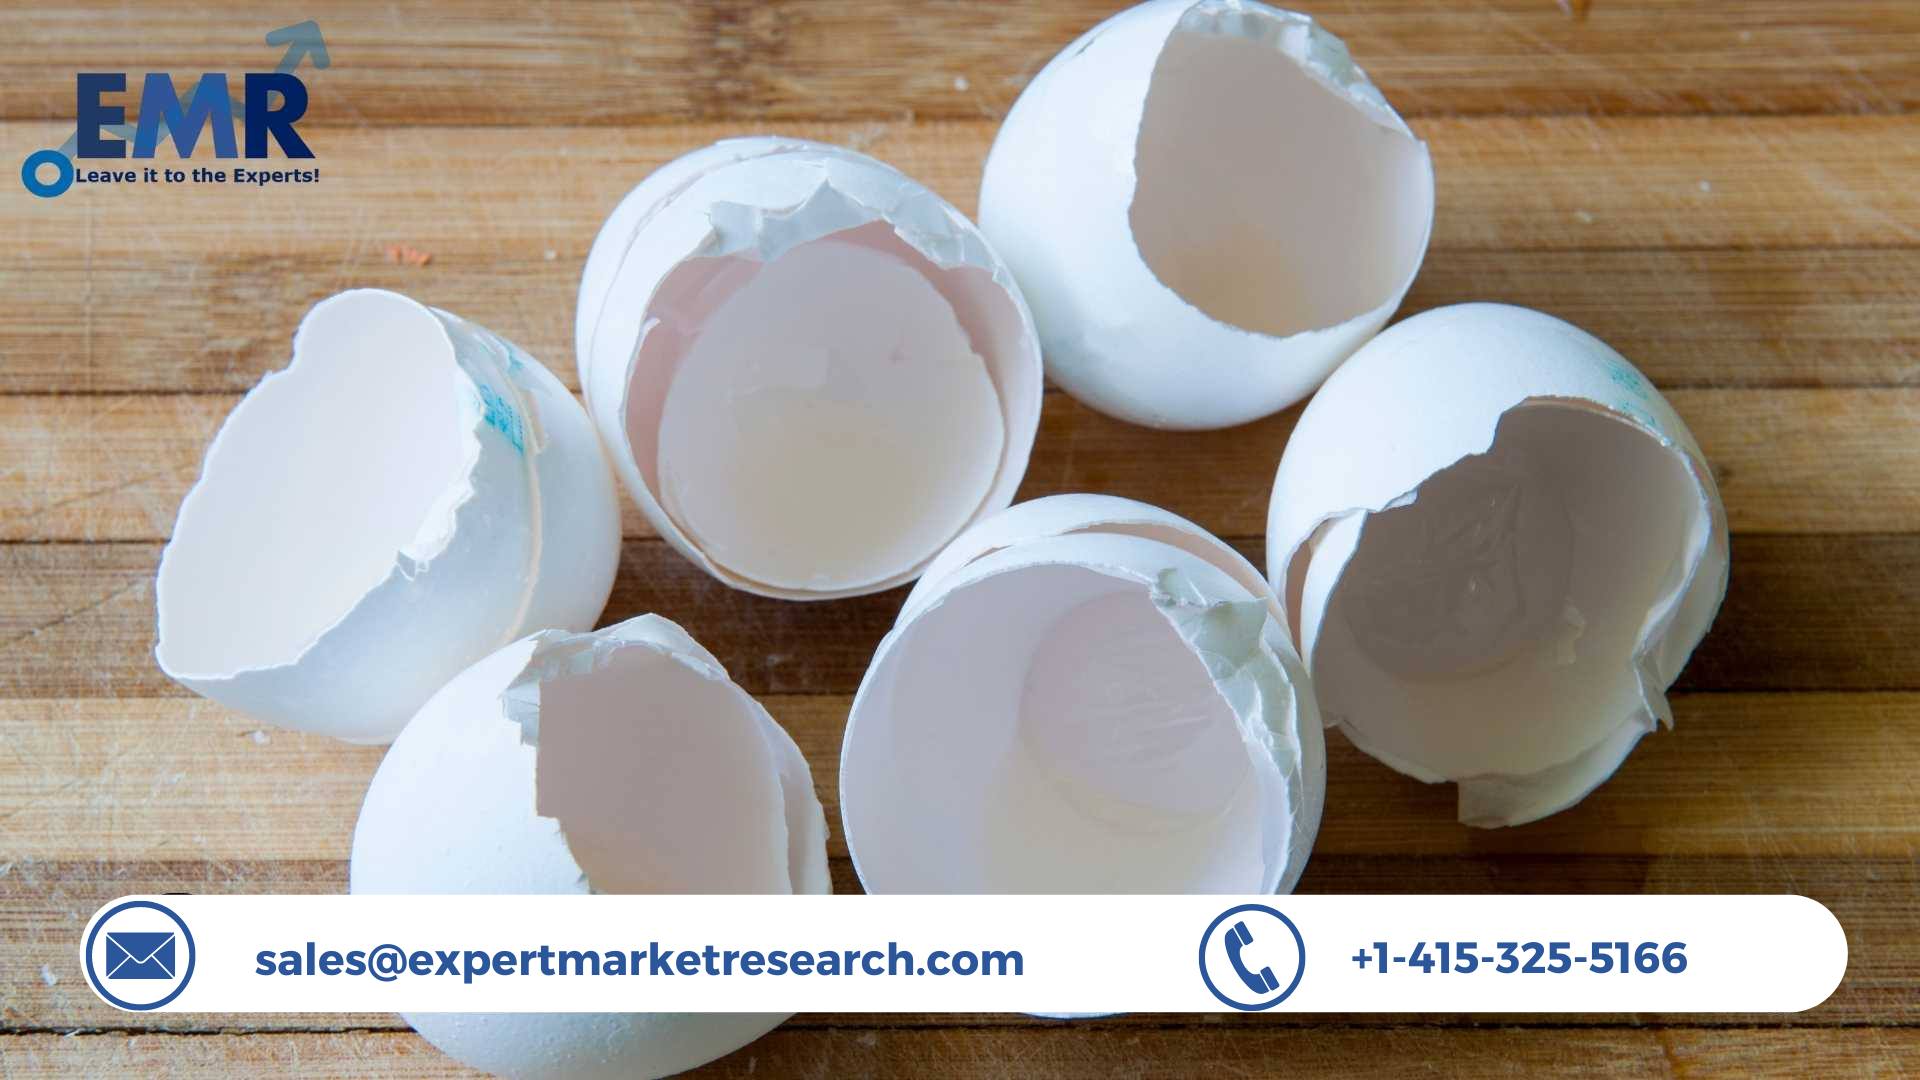 Global Eggshell Membrane Market To Be Driven By The Increasing Demand For Eggshell Membrane In The Food And Beverage Industry In The Forecast Period Of 2023-2028 | EMR Inc.